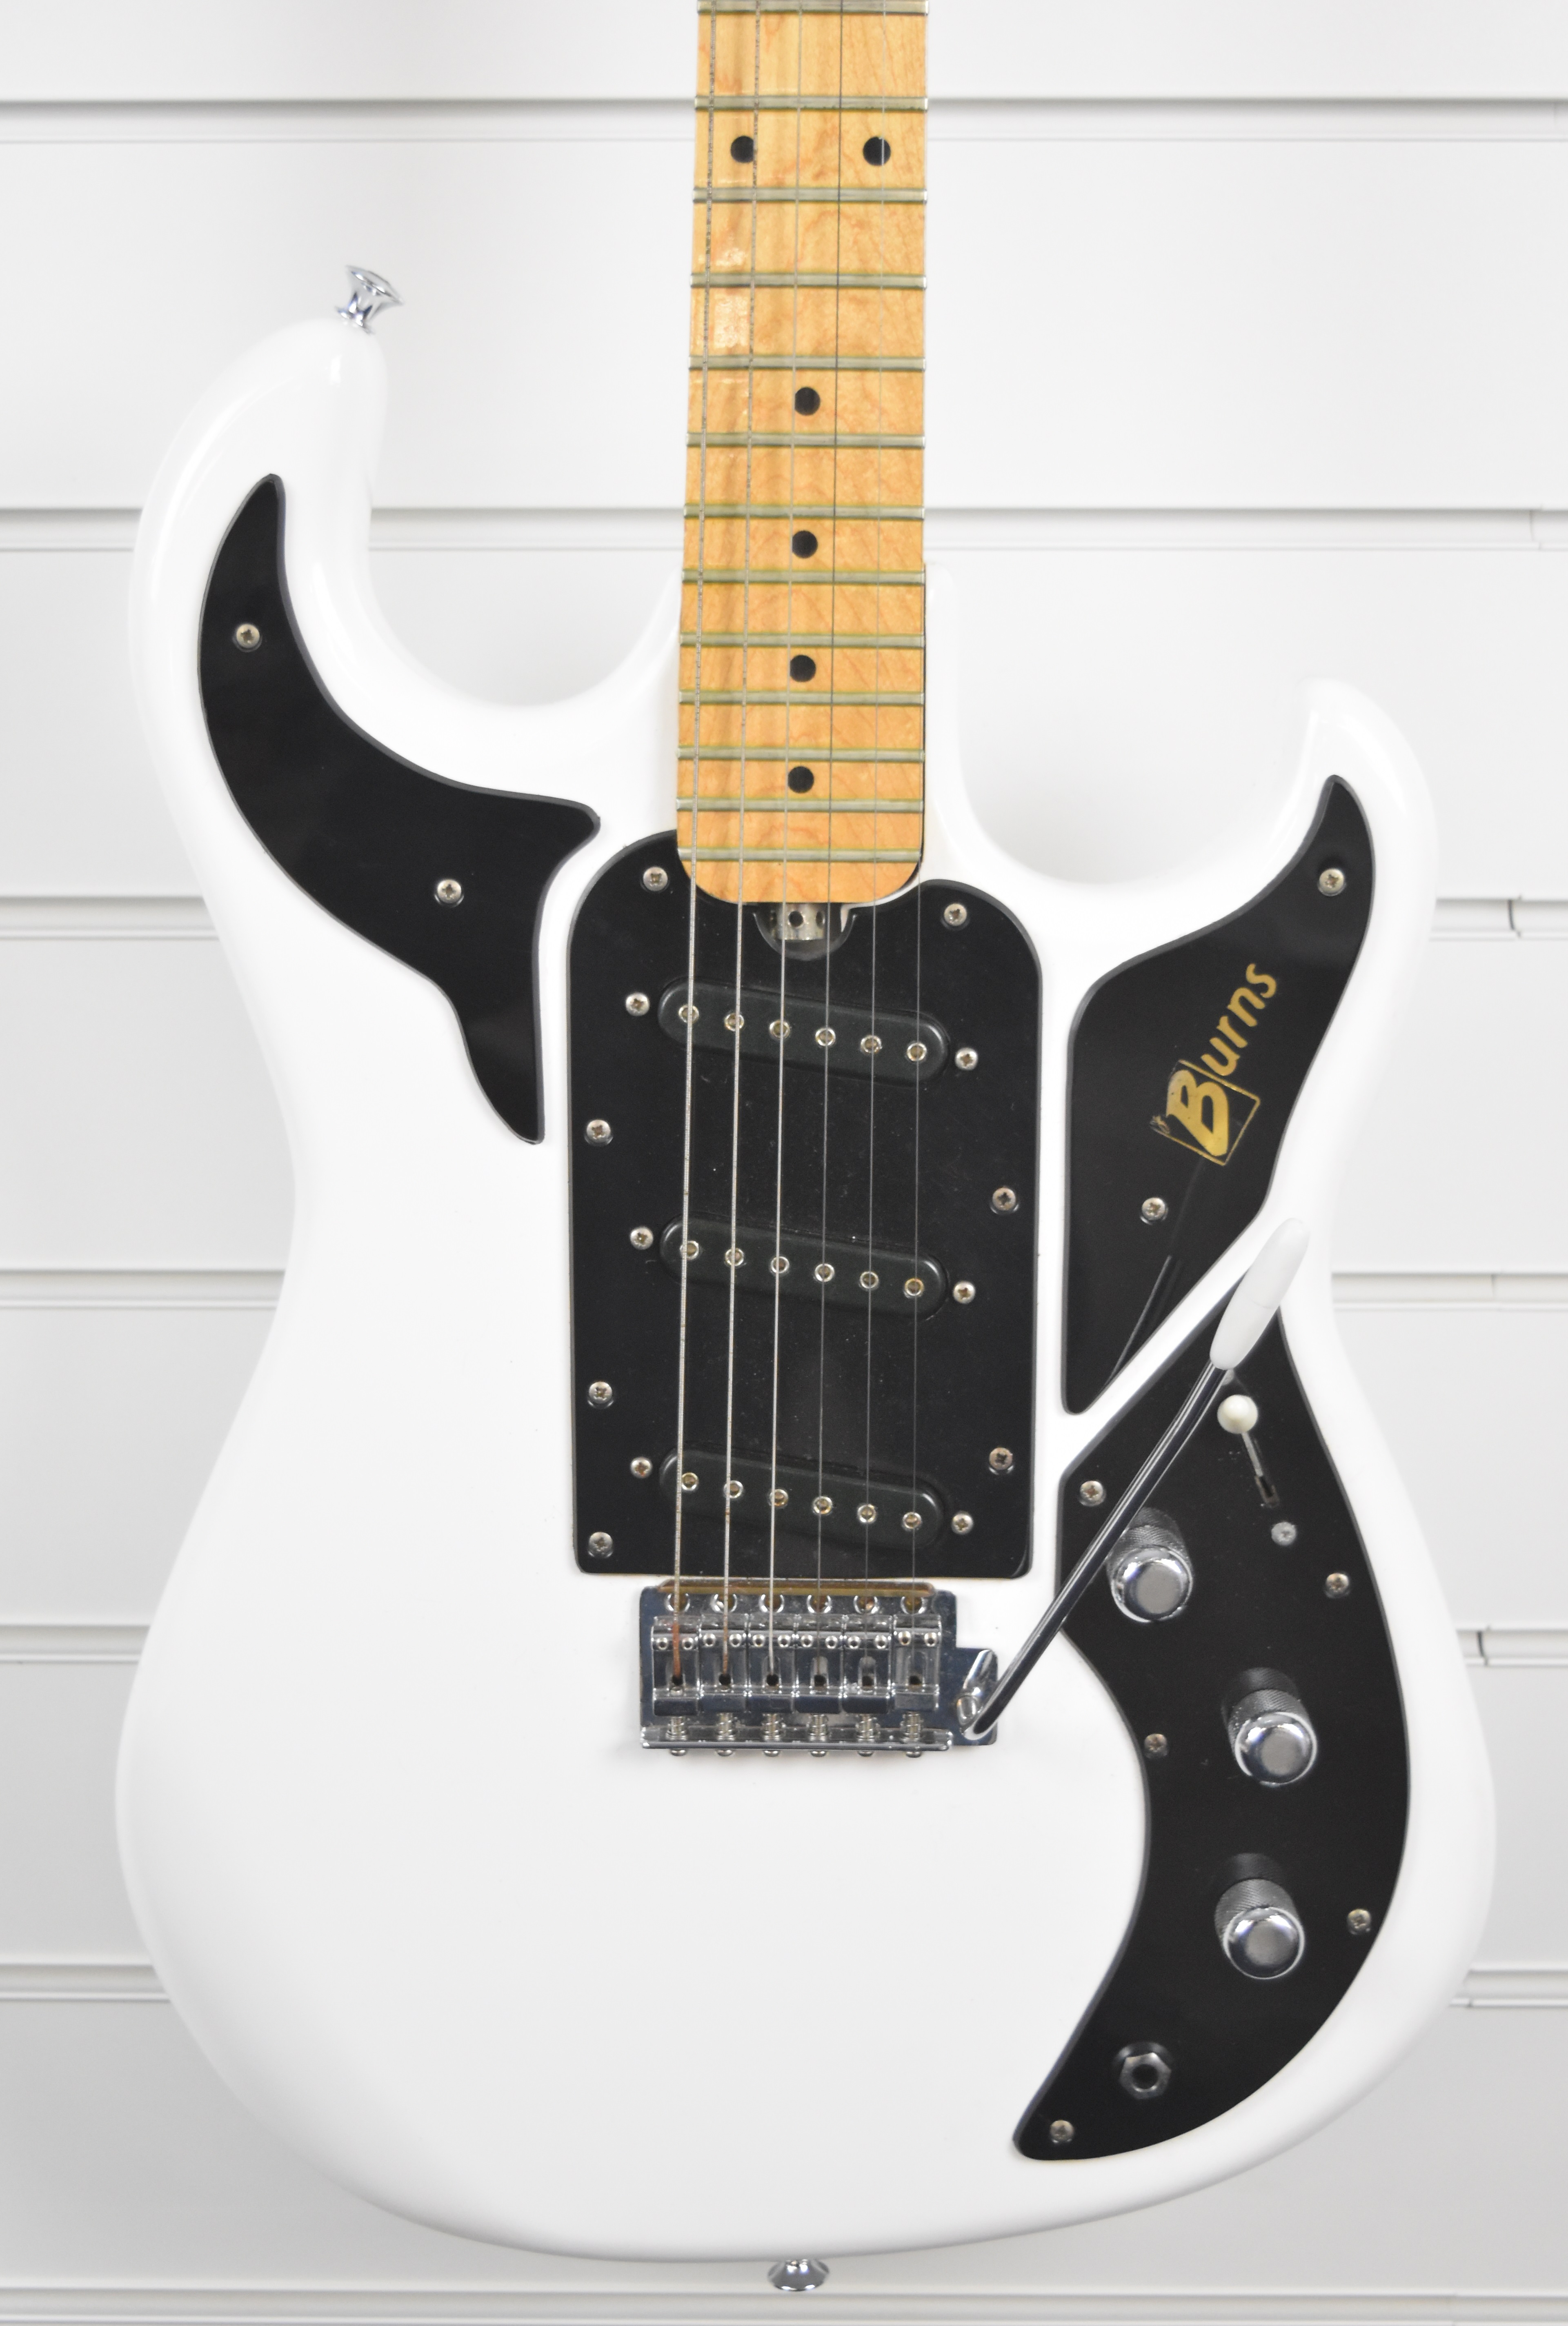 Burns solid body electric guitar in similar styling to the Marquee model, with 3 single coil - Image 2 of 6